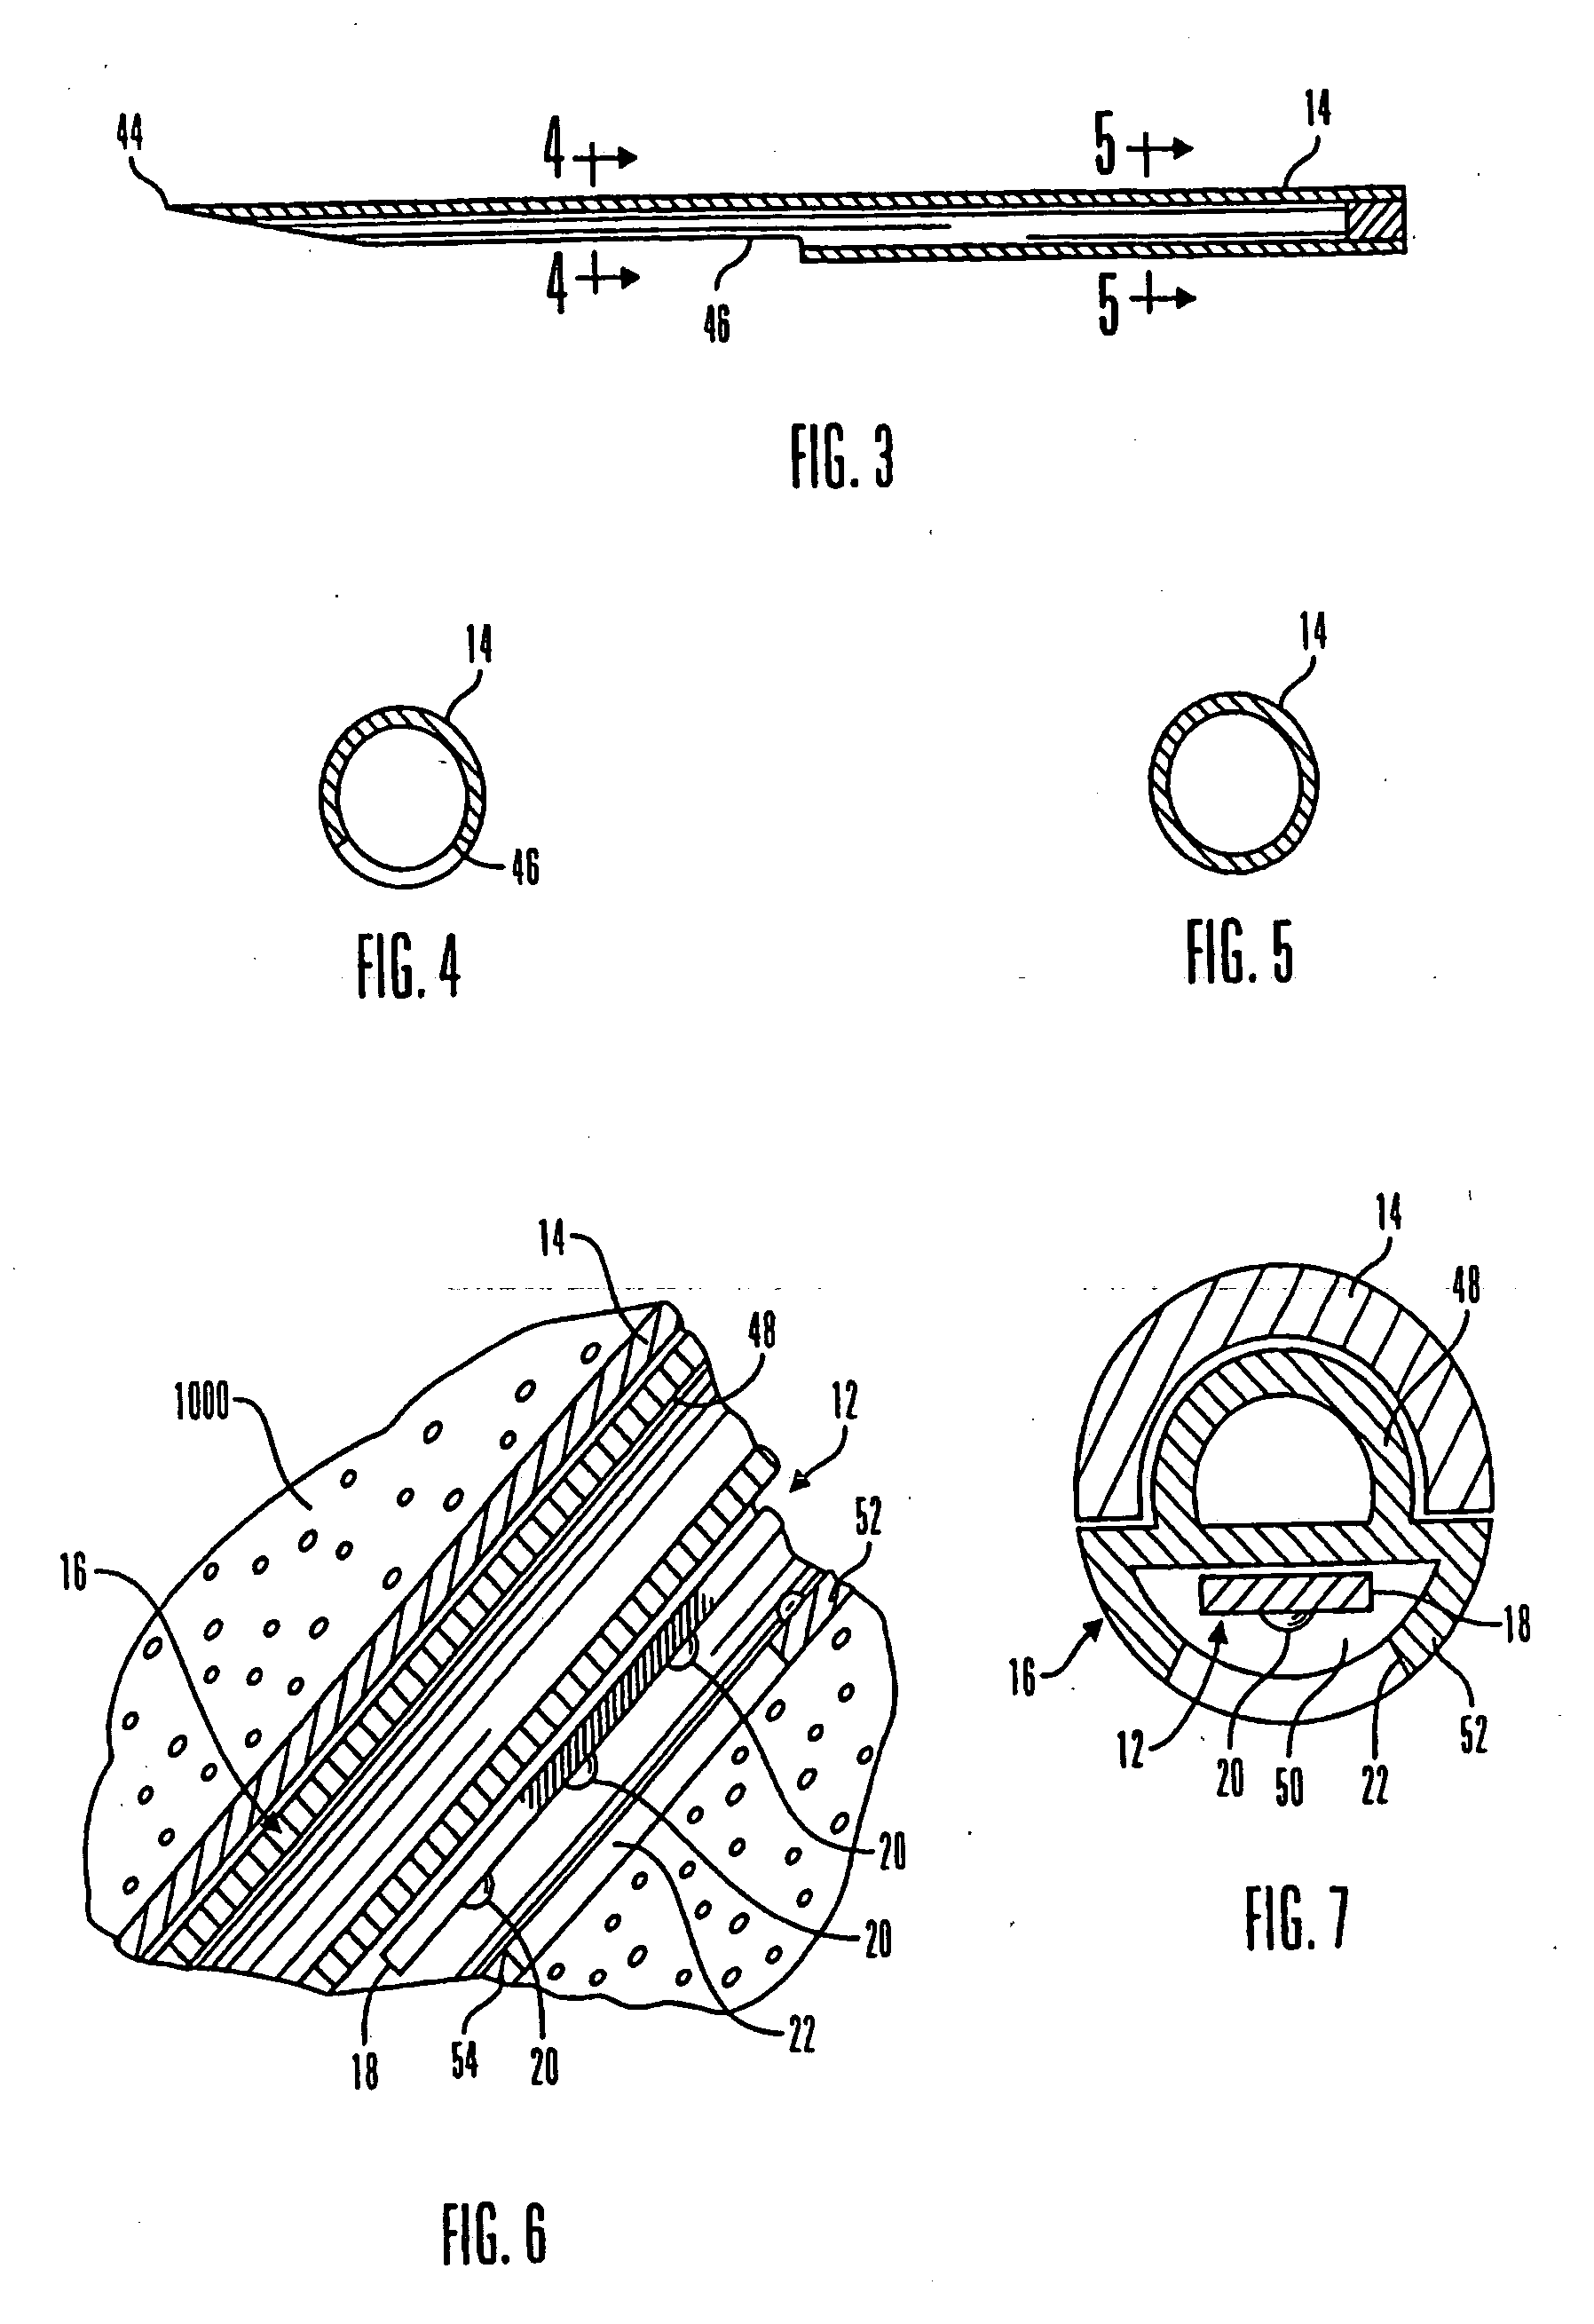 Telemetered characteristic monitor system and method of using the same